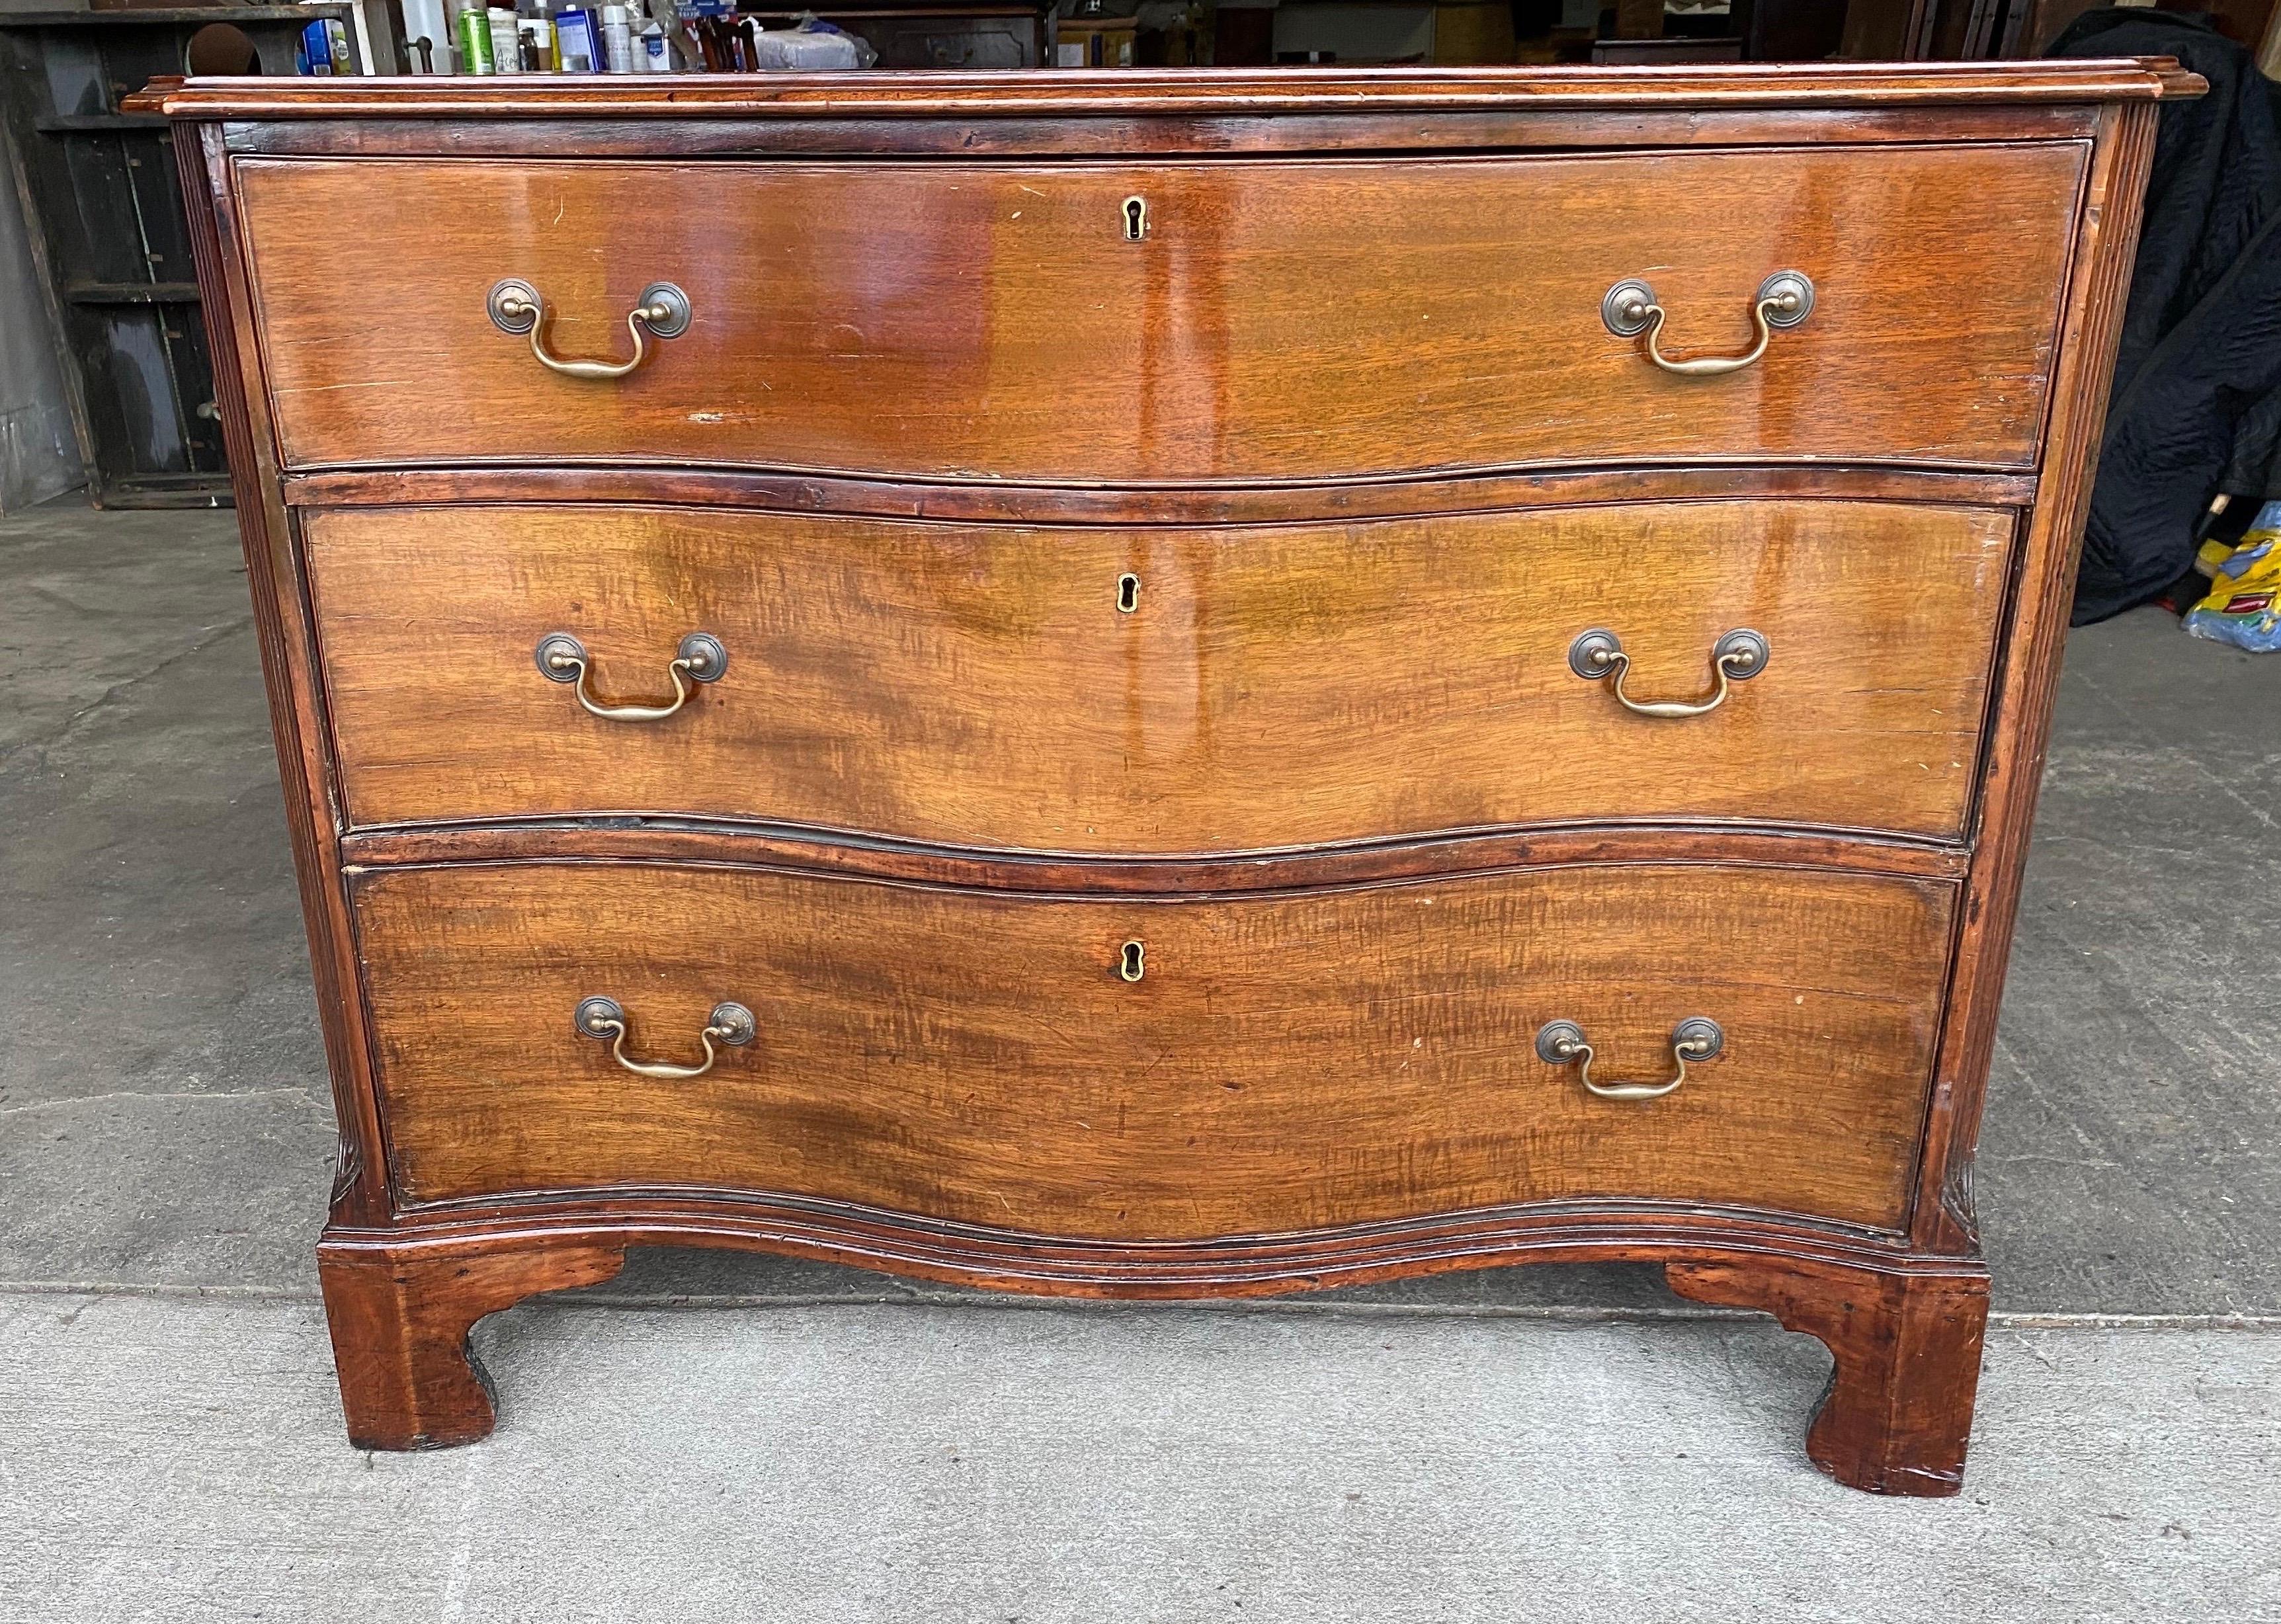 18th-early 19th century Georgian mahogany serpentine bedside chest with molded top, canted and reeded corners and bracket feet.